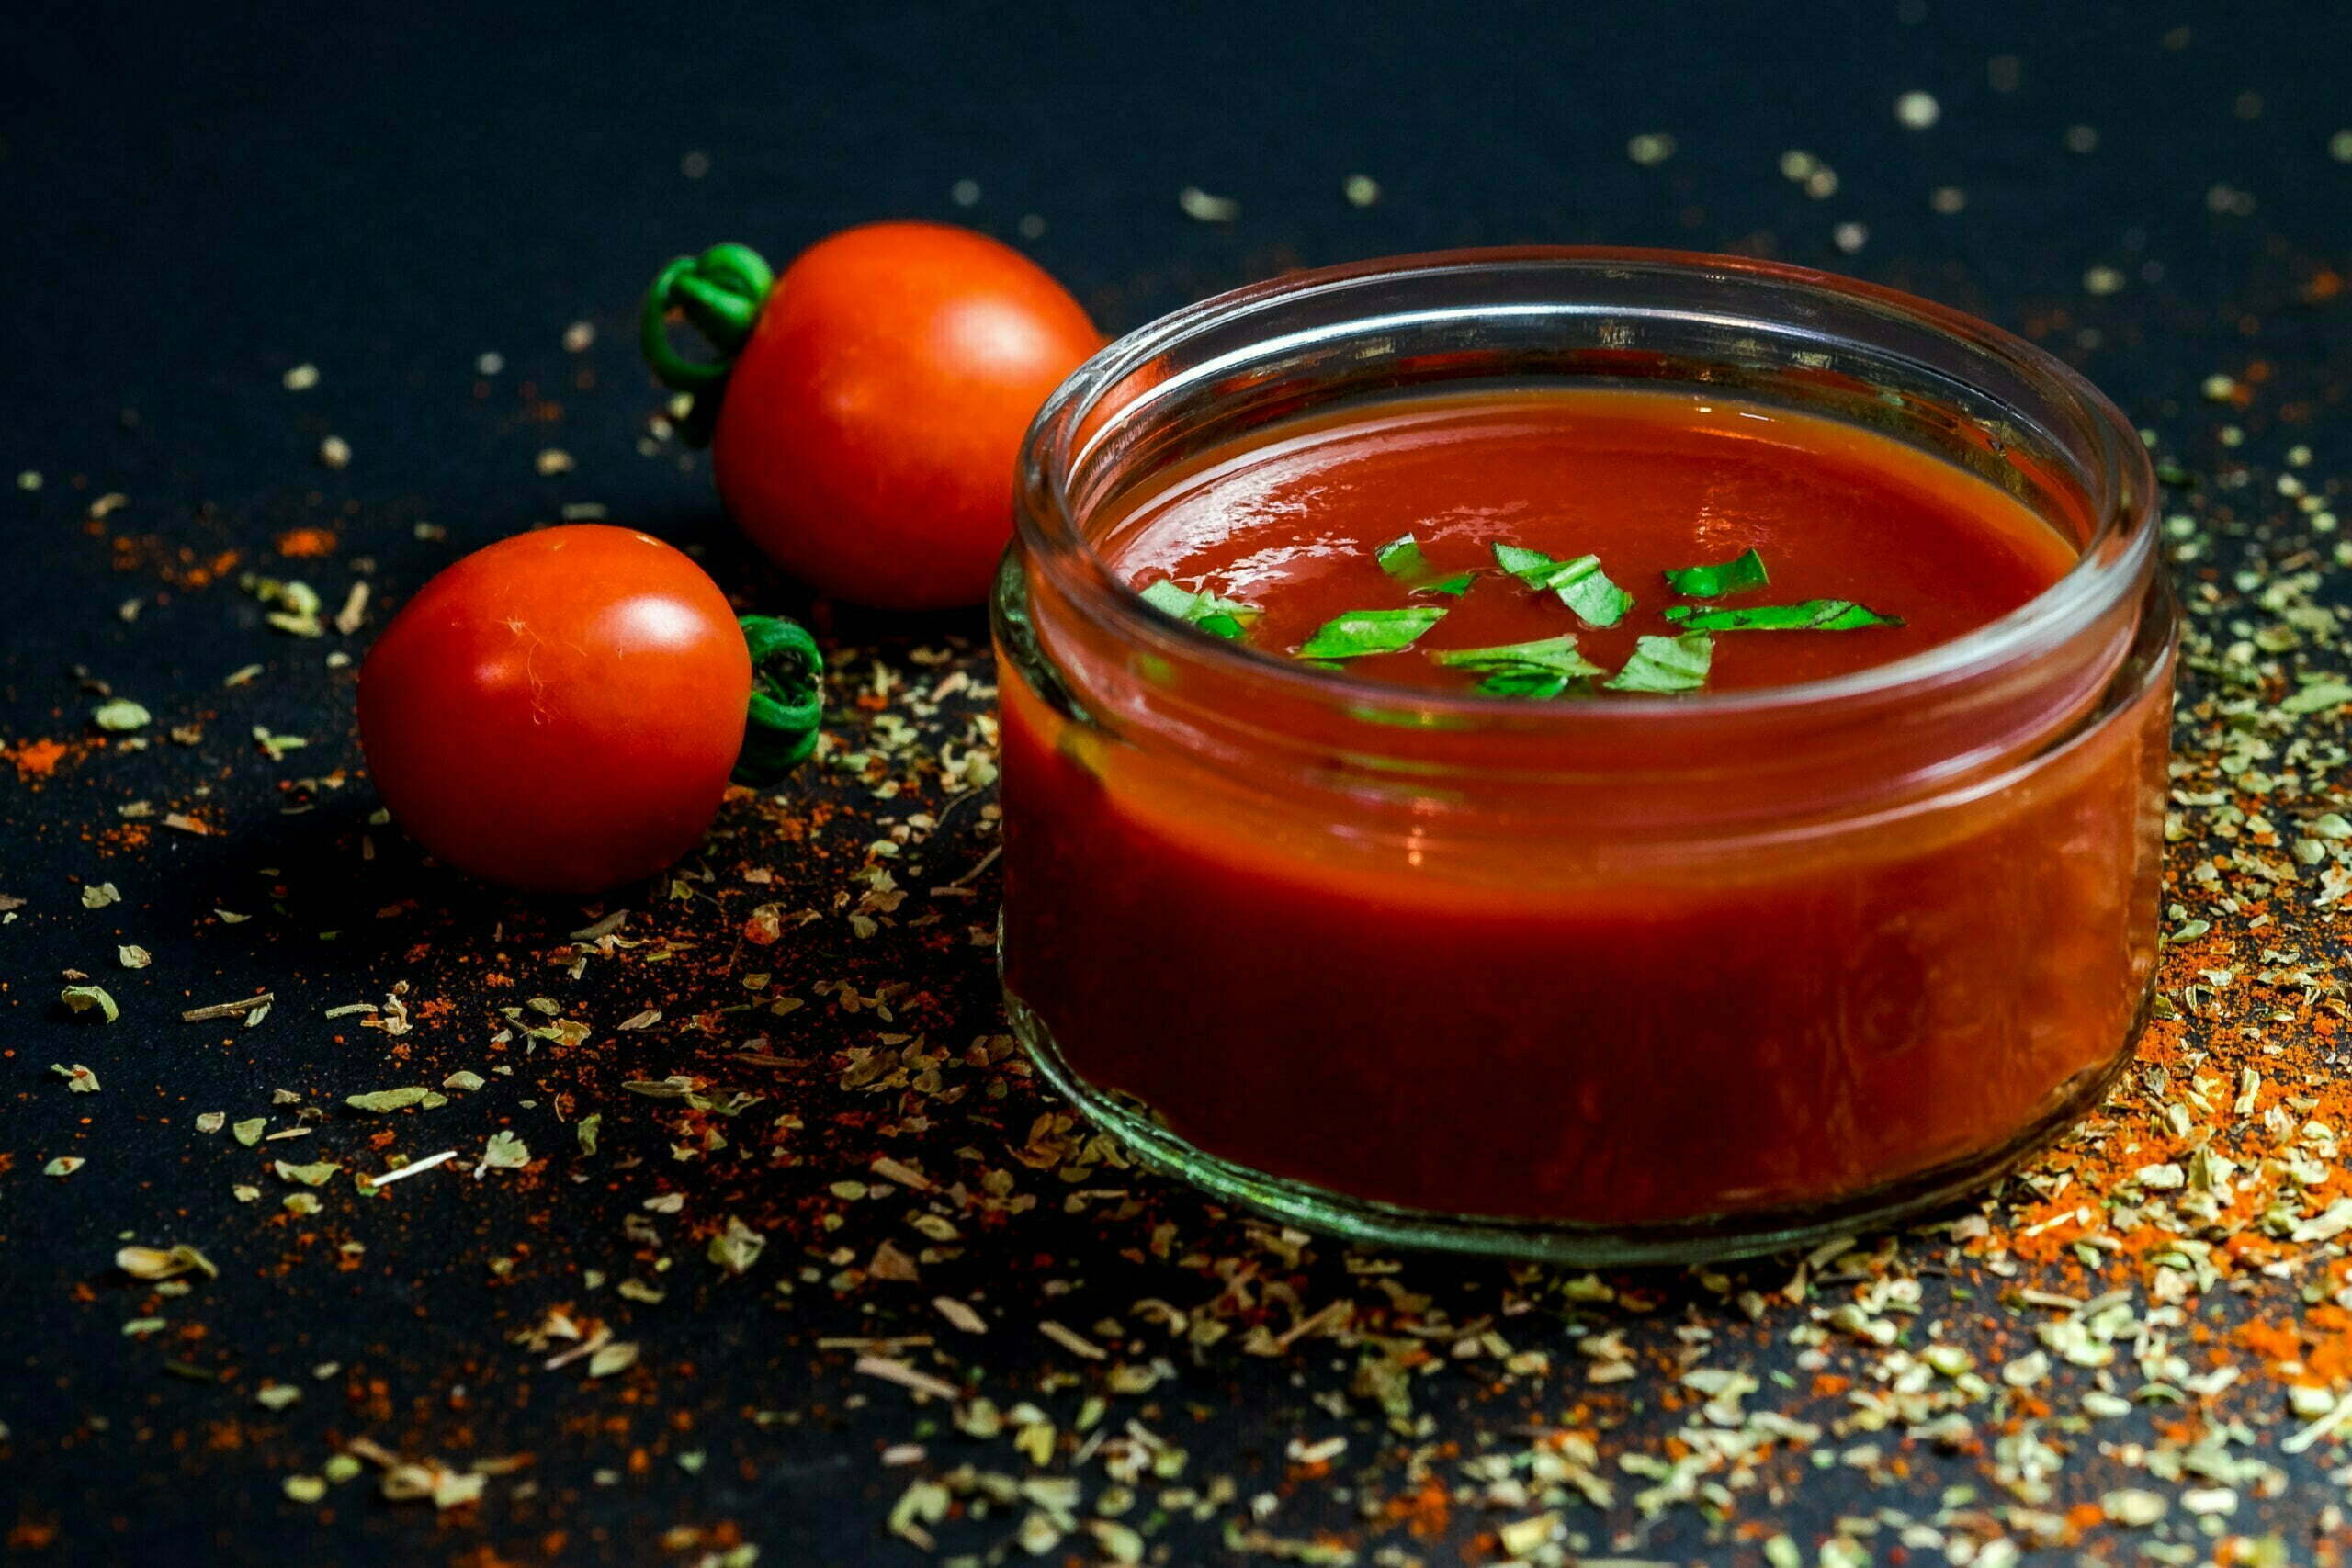 What is Pomodoro Sauce?